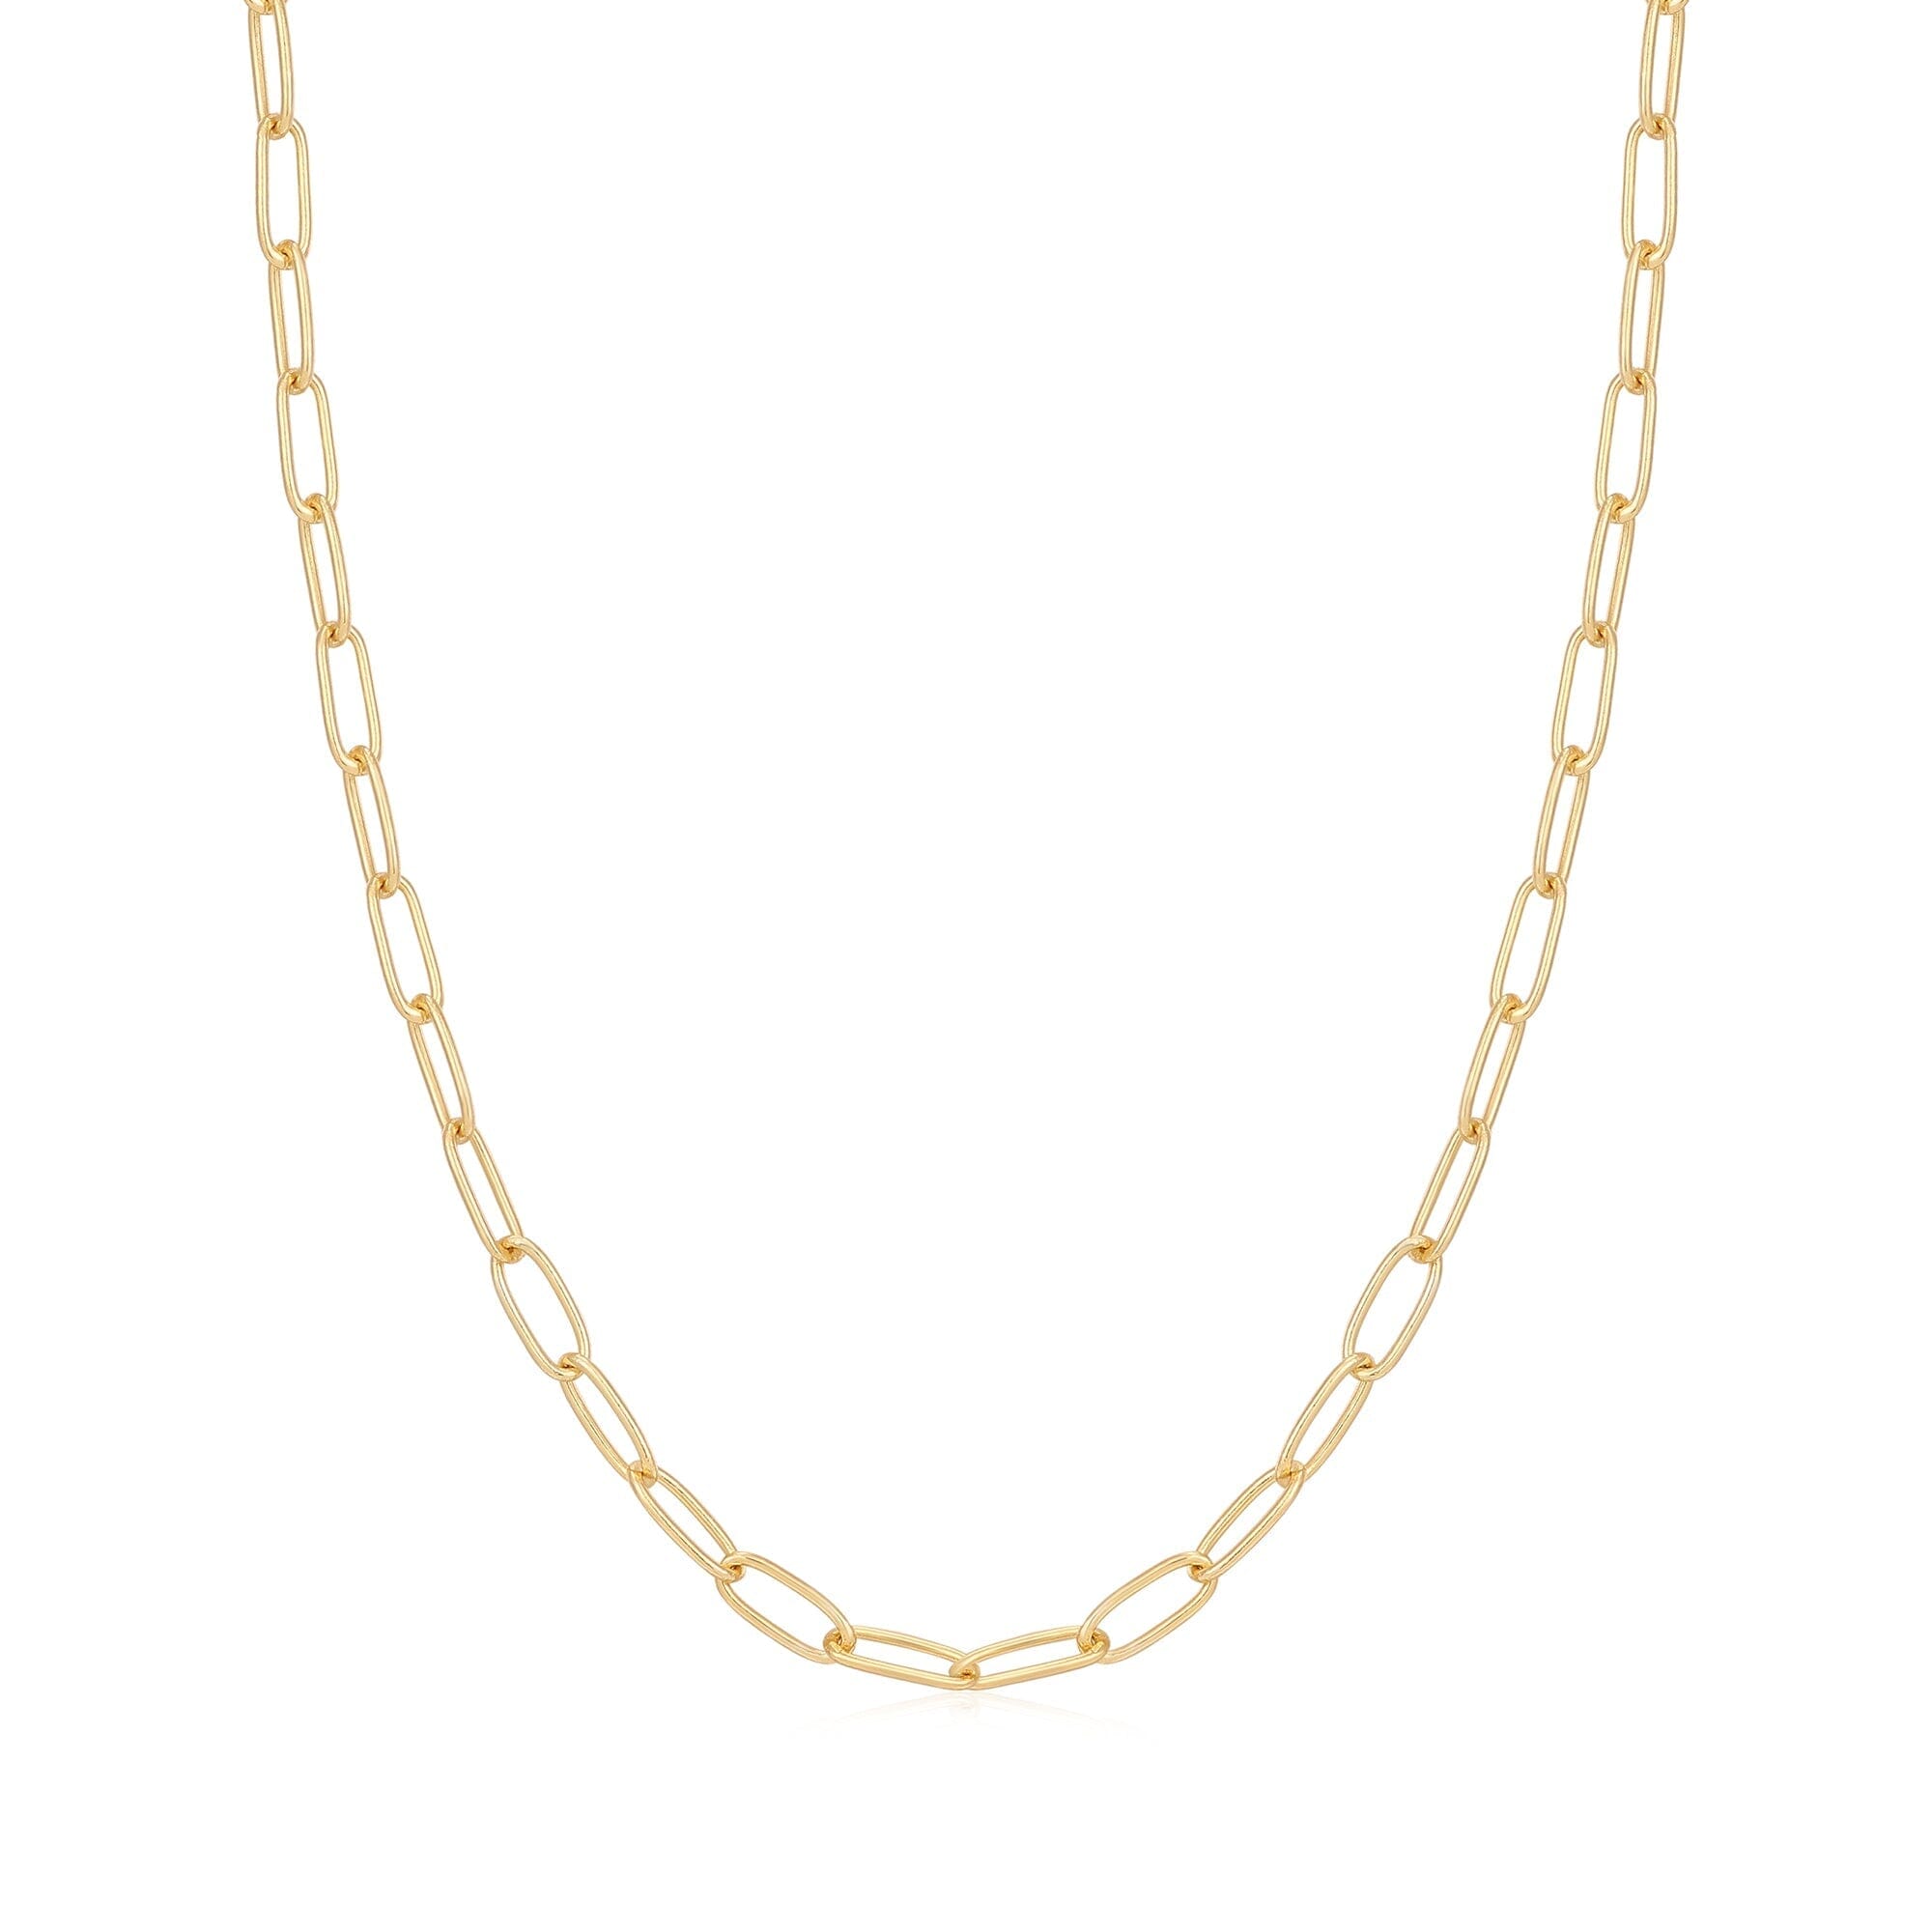 Ania Haie Gold Link Charm Chain Necklace Necklaces Ania Haie 